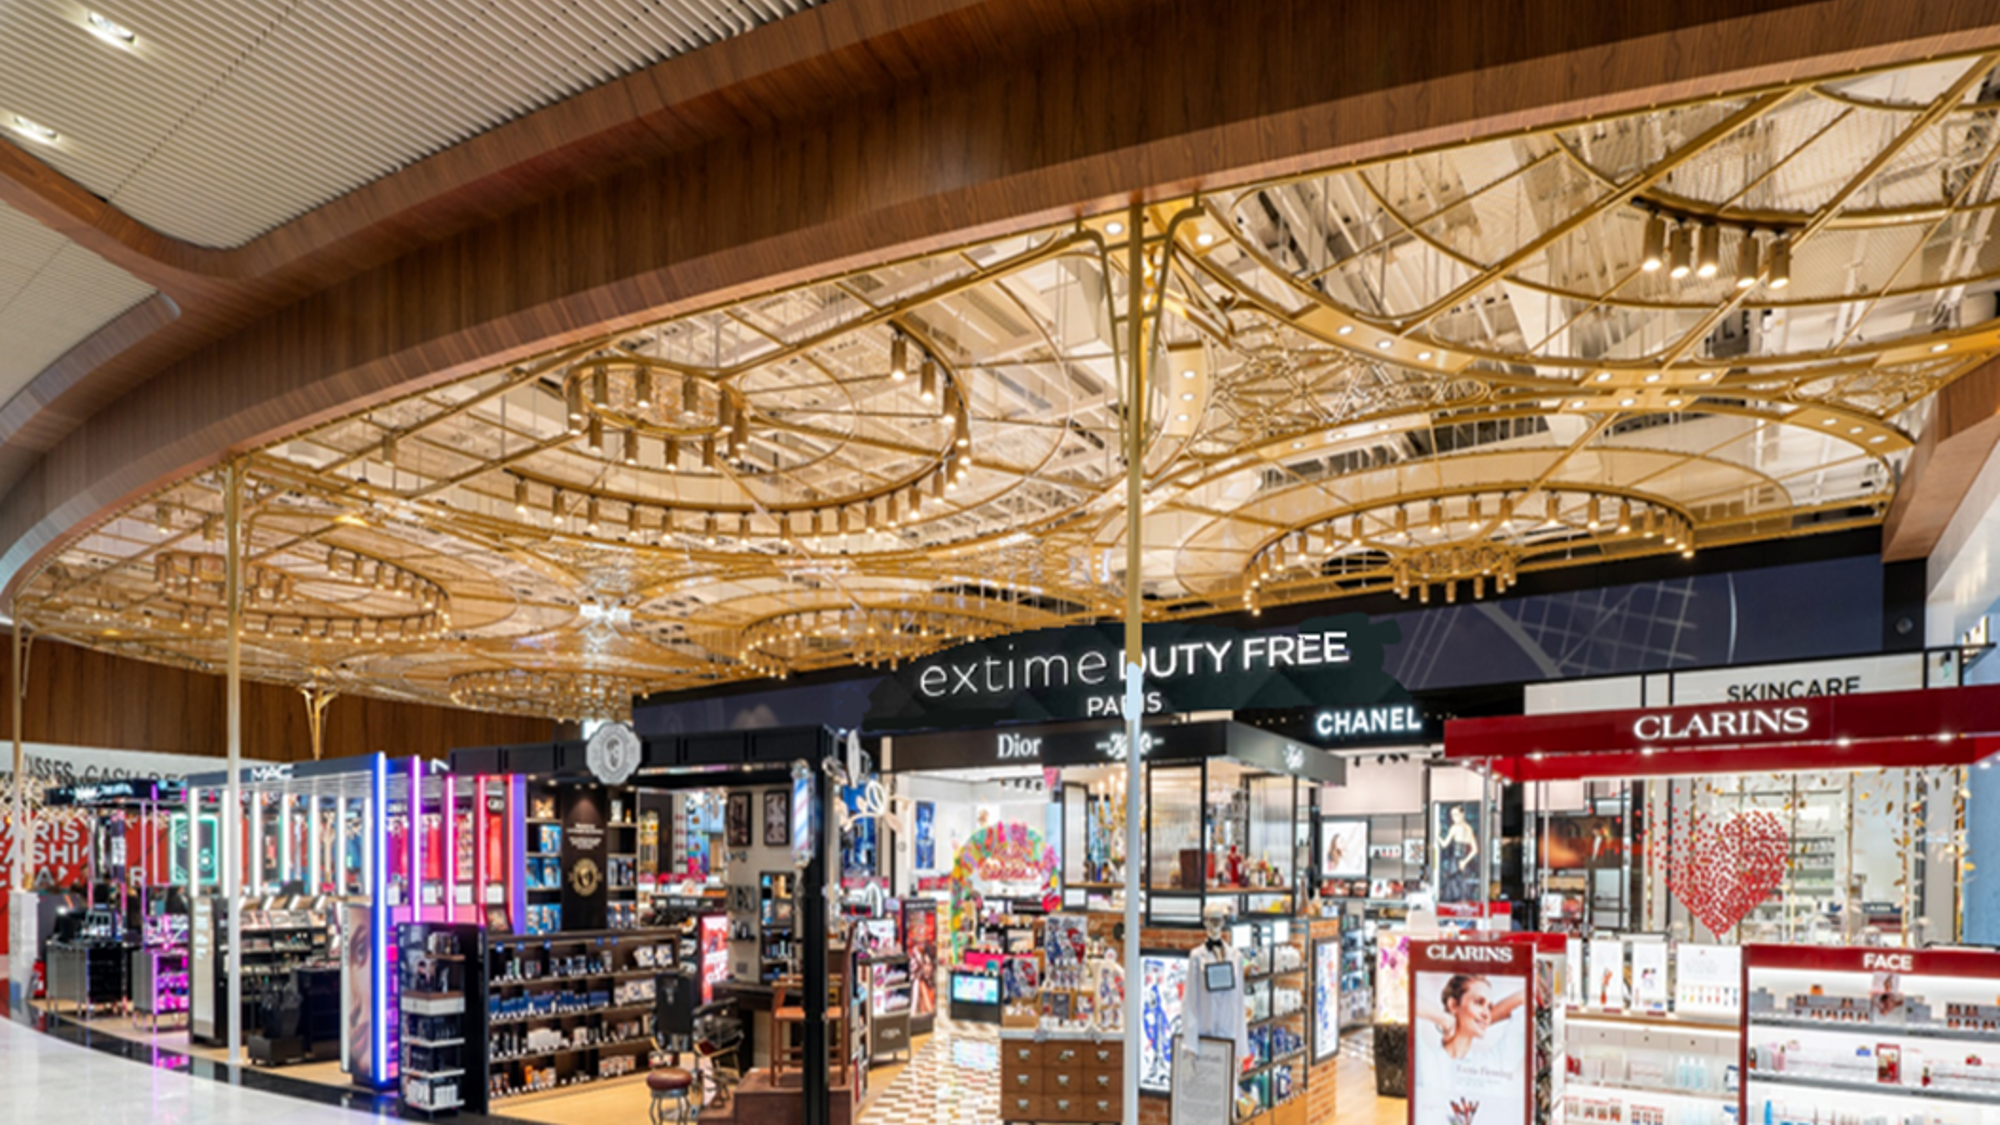 Groupe ADP has selected Lagardère Travel Retail as co-shareholder of the  future joint venture Extime Duty Free Paris - Groupe ADP - Service presse